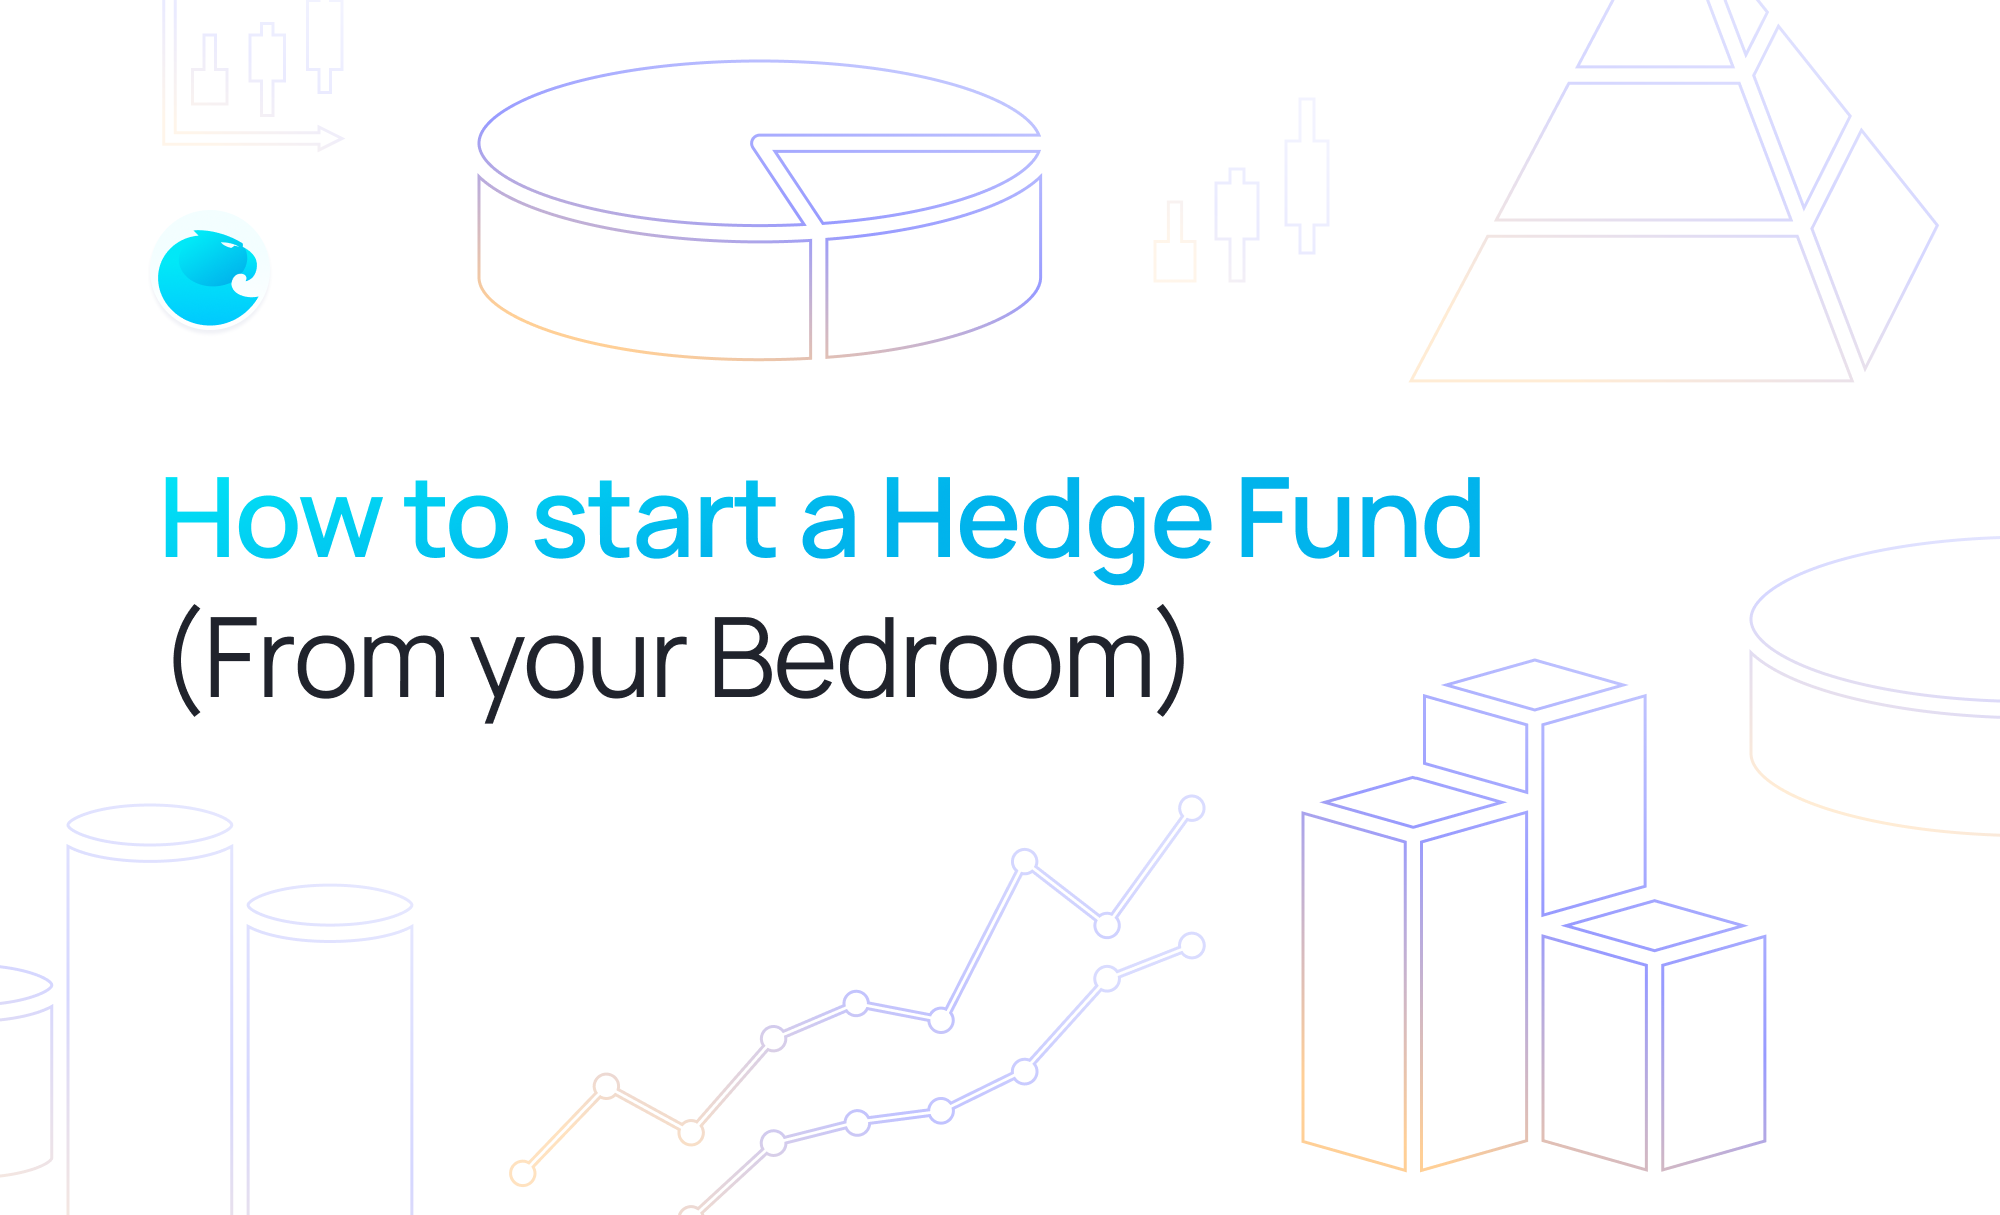 How to Start a Hedge Fund (from your Bedroom) | Surf Finance